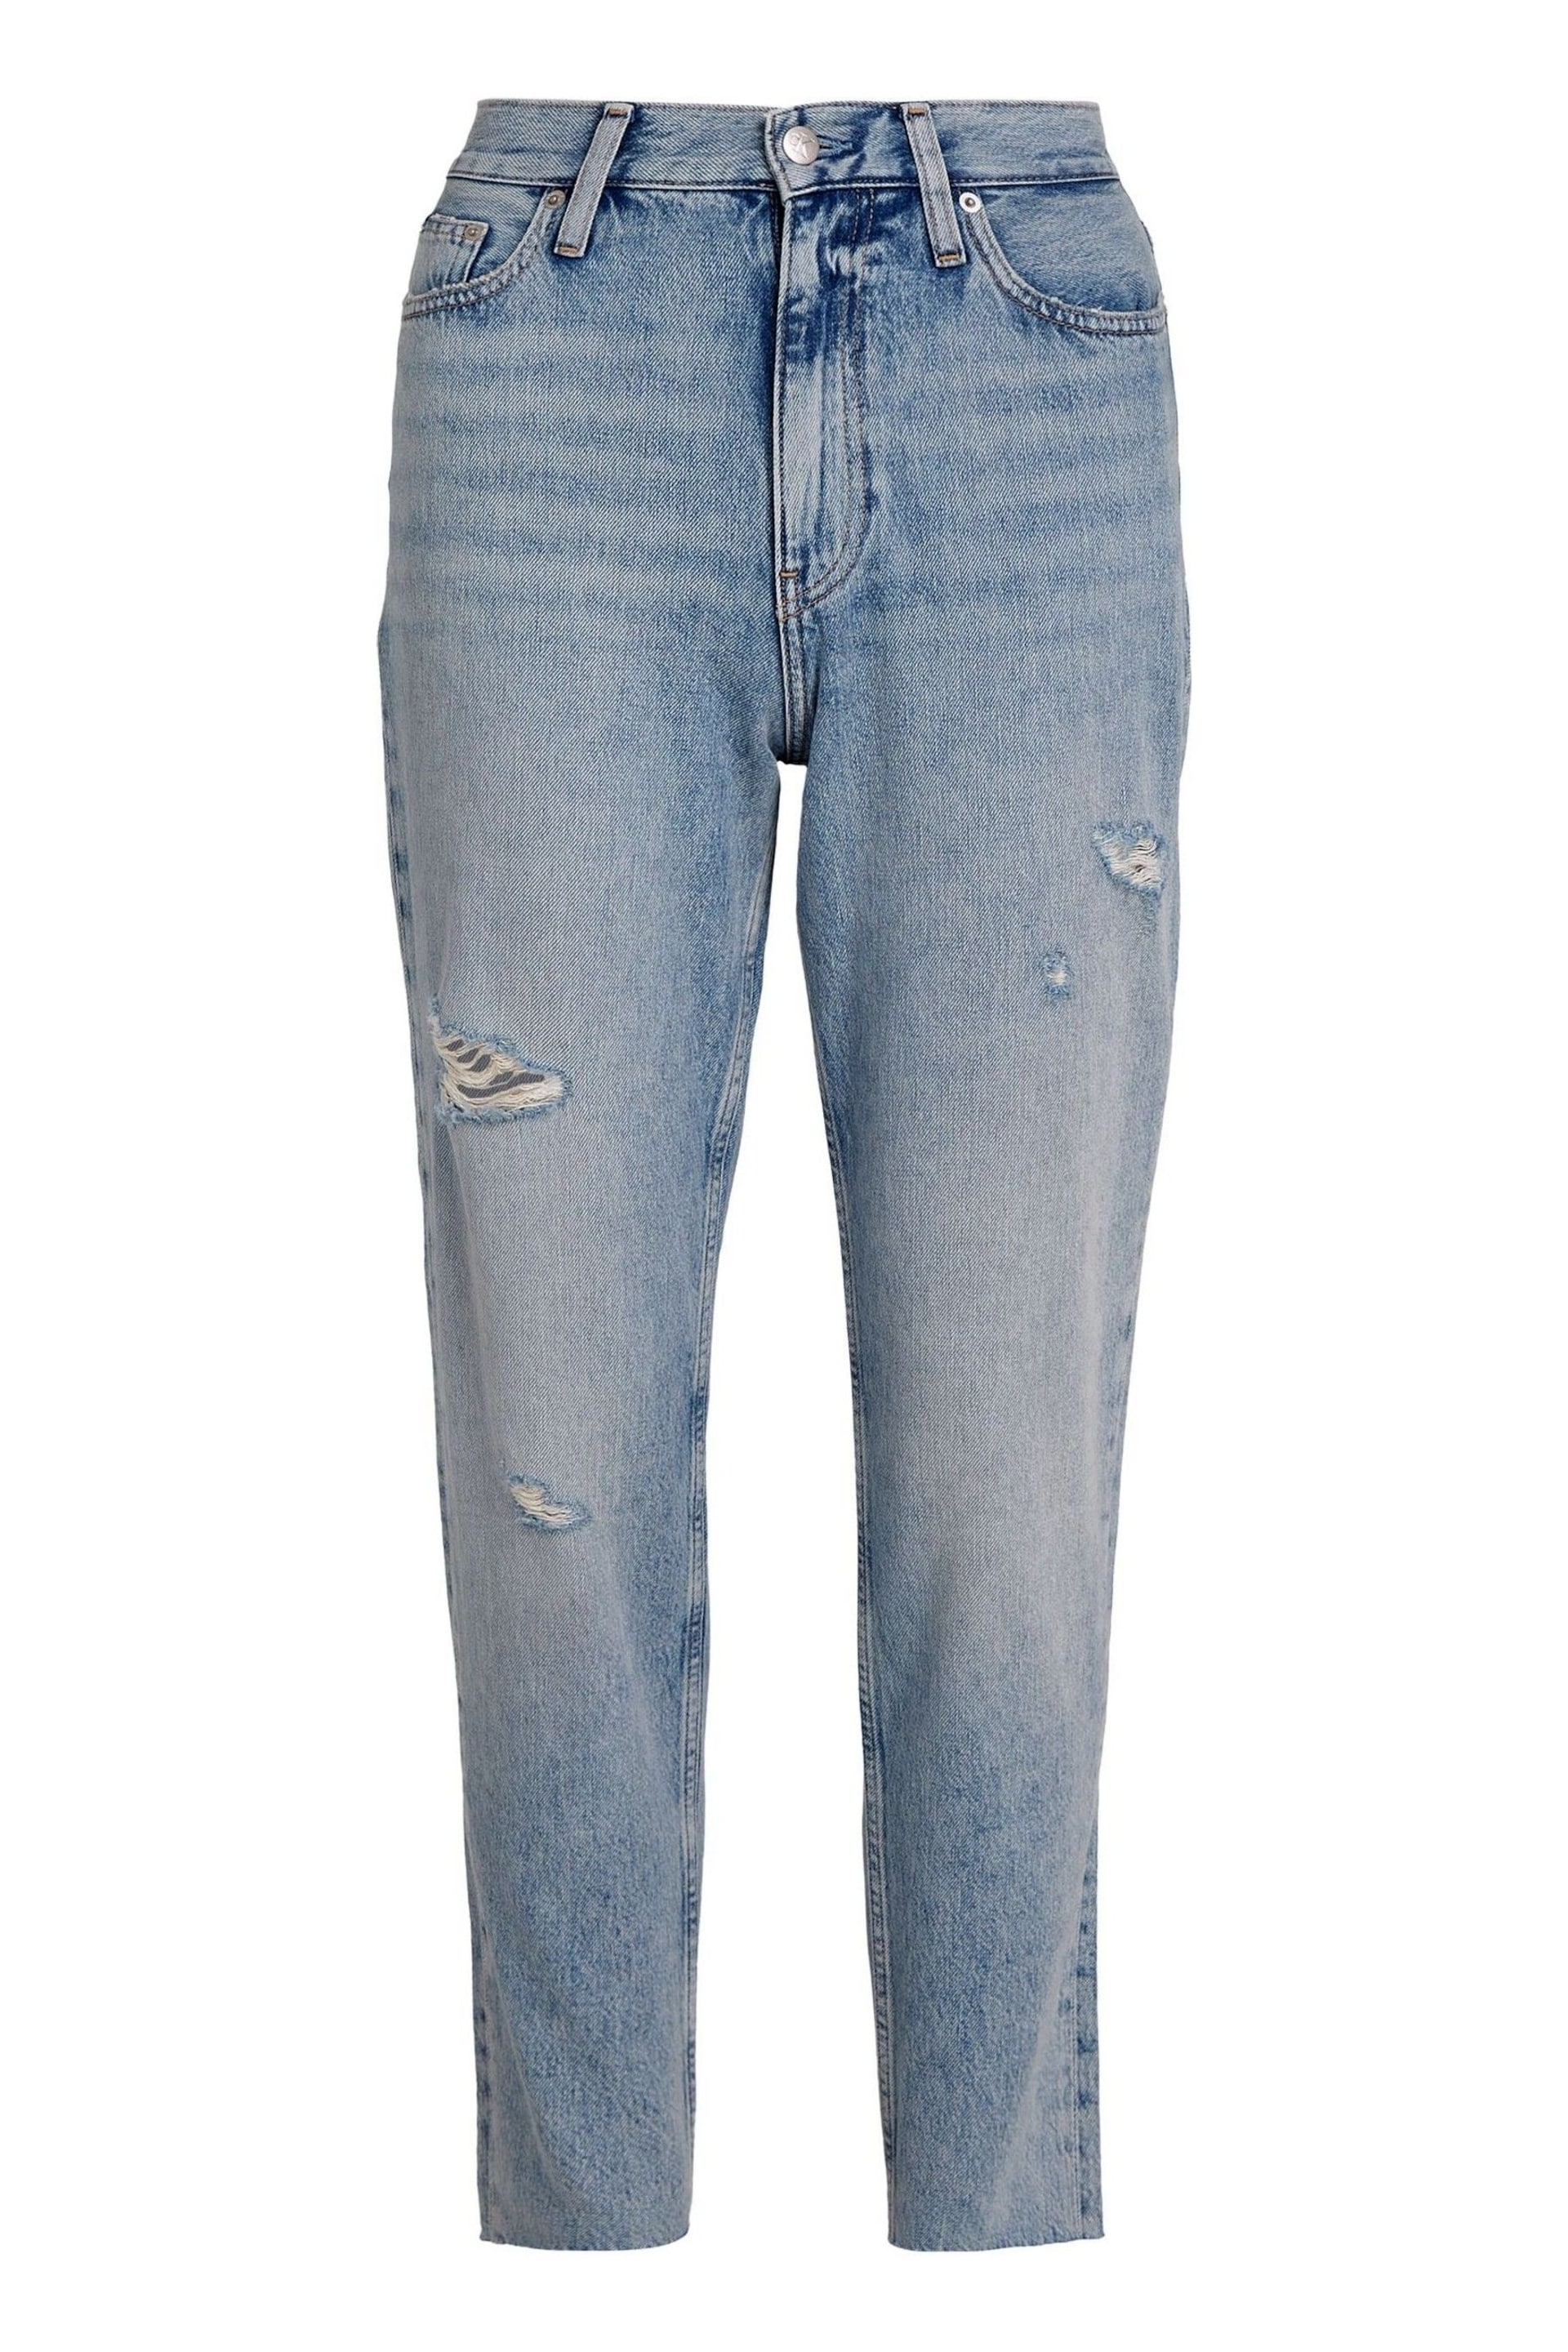 Calvin Klein Jeans Blue Mom Jeans - Image 5 of 5